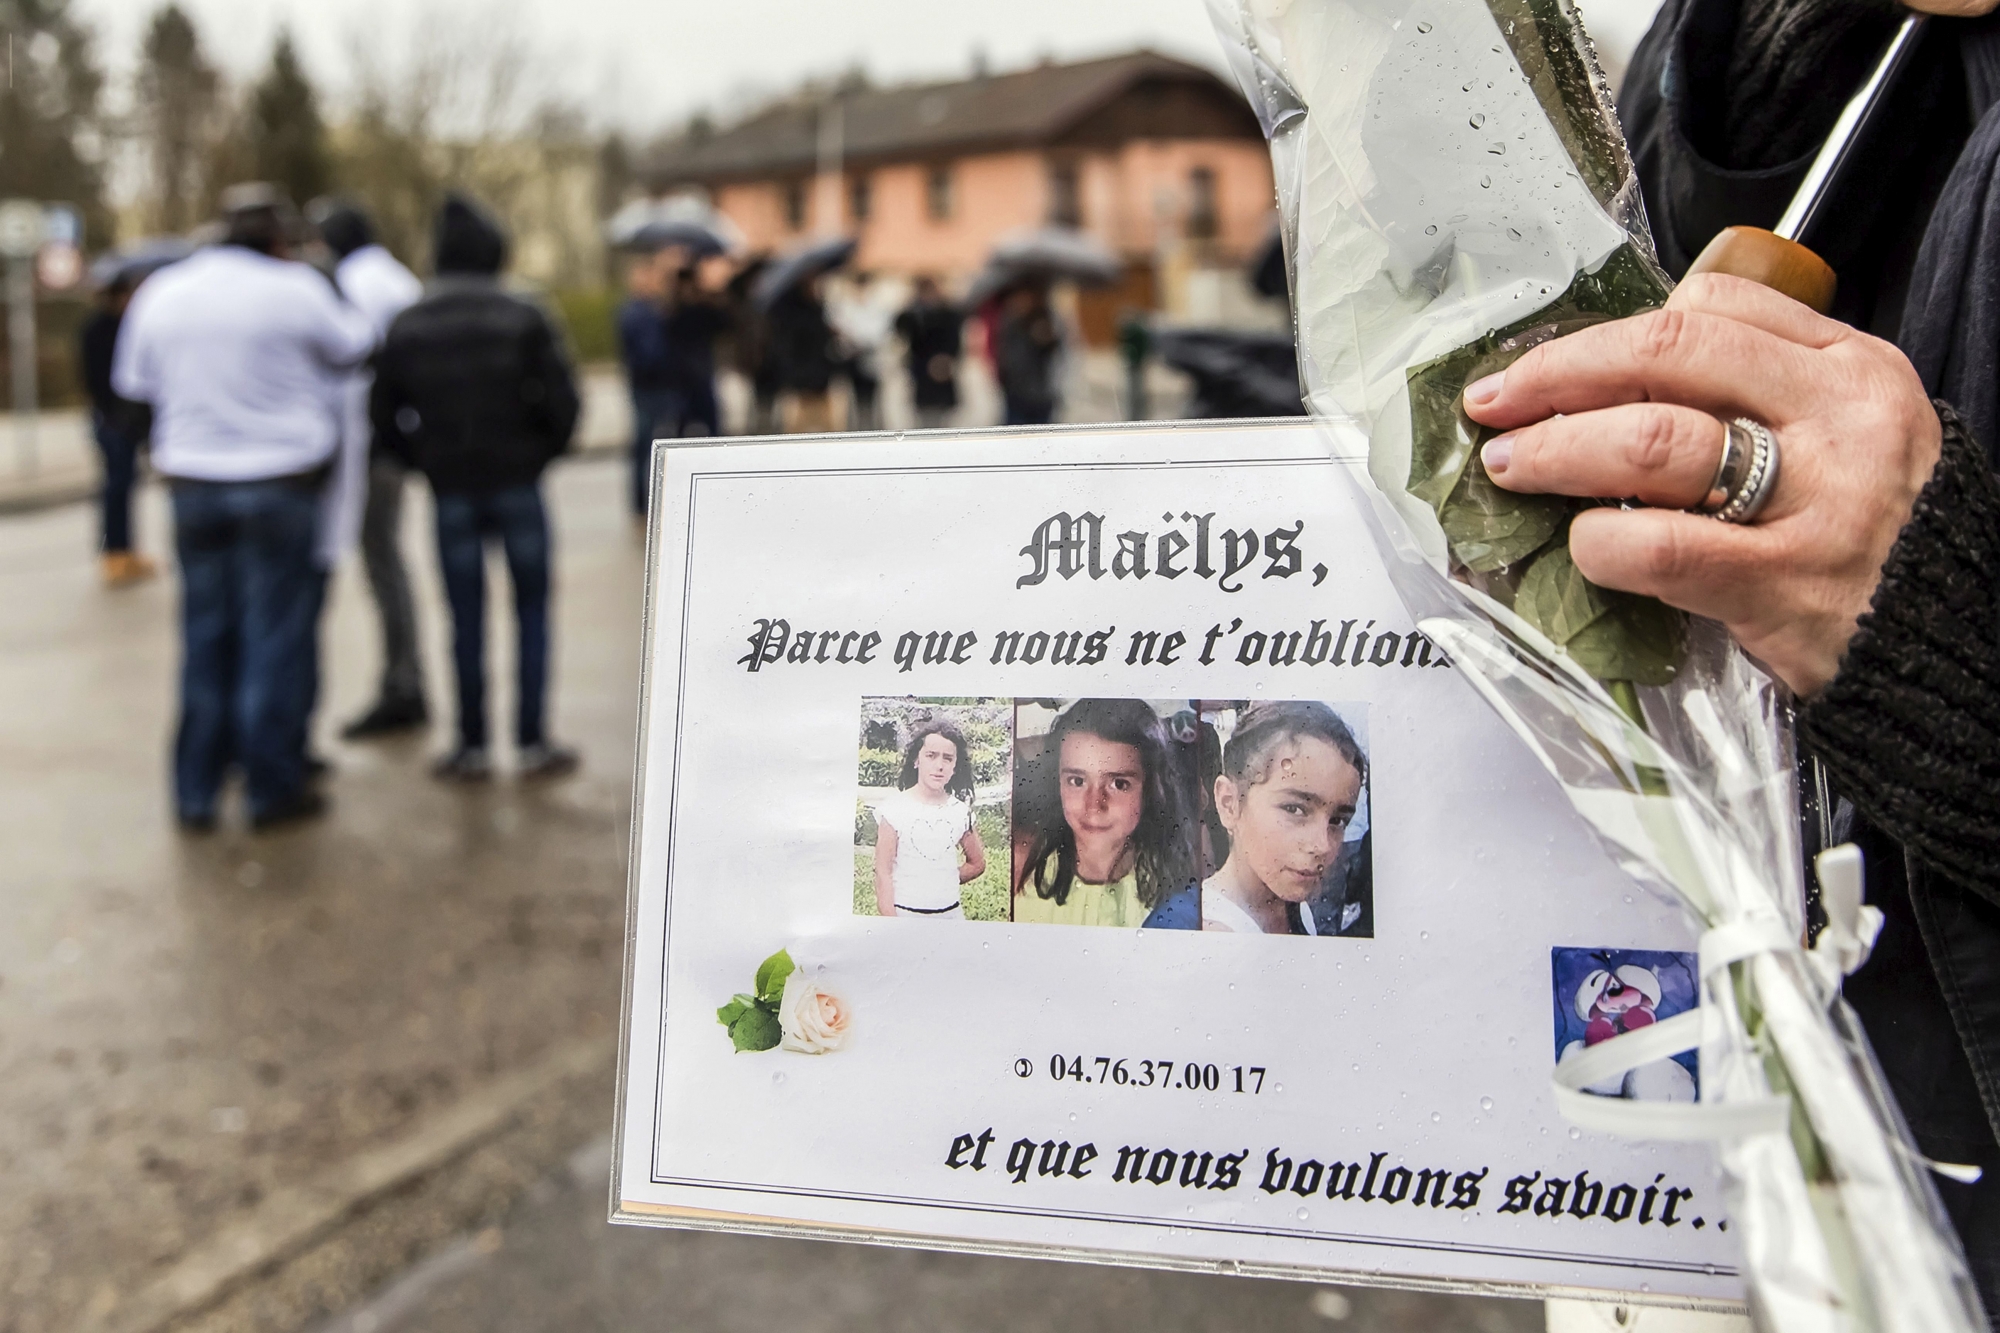 In this picture dated Wednesday, Dec. 27, 2017, people take part in a "white march" in tribute to missing girl, Maelys de Araujo, in Pont-de-Beauvoisin, central France. French authorities have handed preliminary kidnapping charges to a 34-year-old man in the case of a 9-year-old girl who went missing four months ago from a wedding celebration in France. (AP Photo/Darius) FRANCE MISSING GIRL